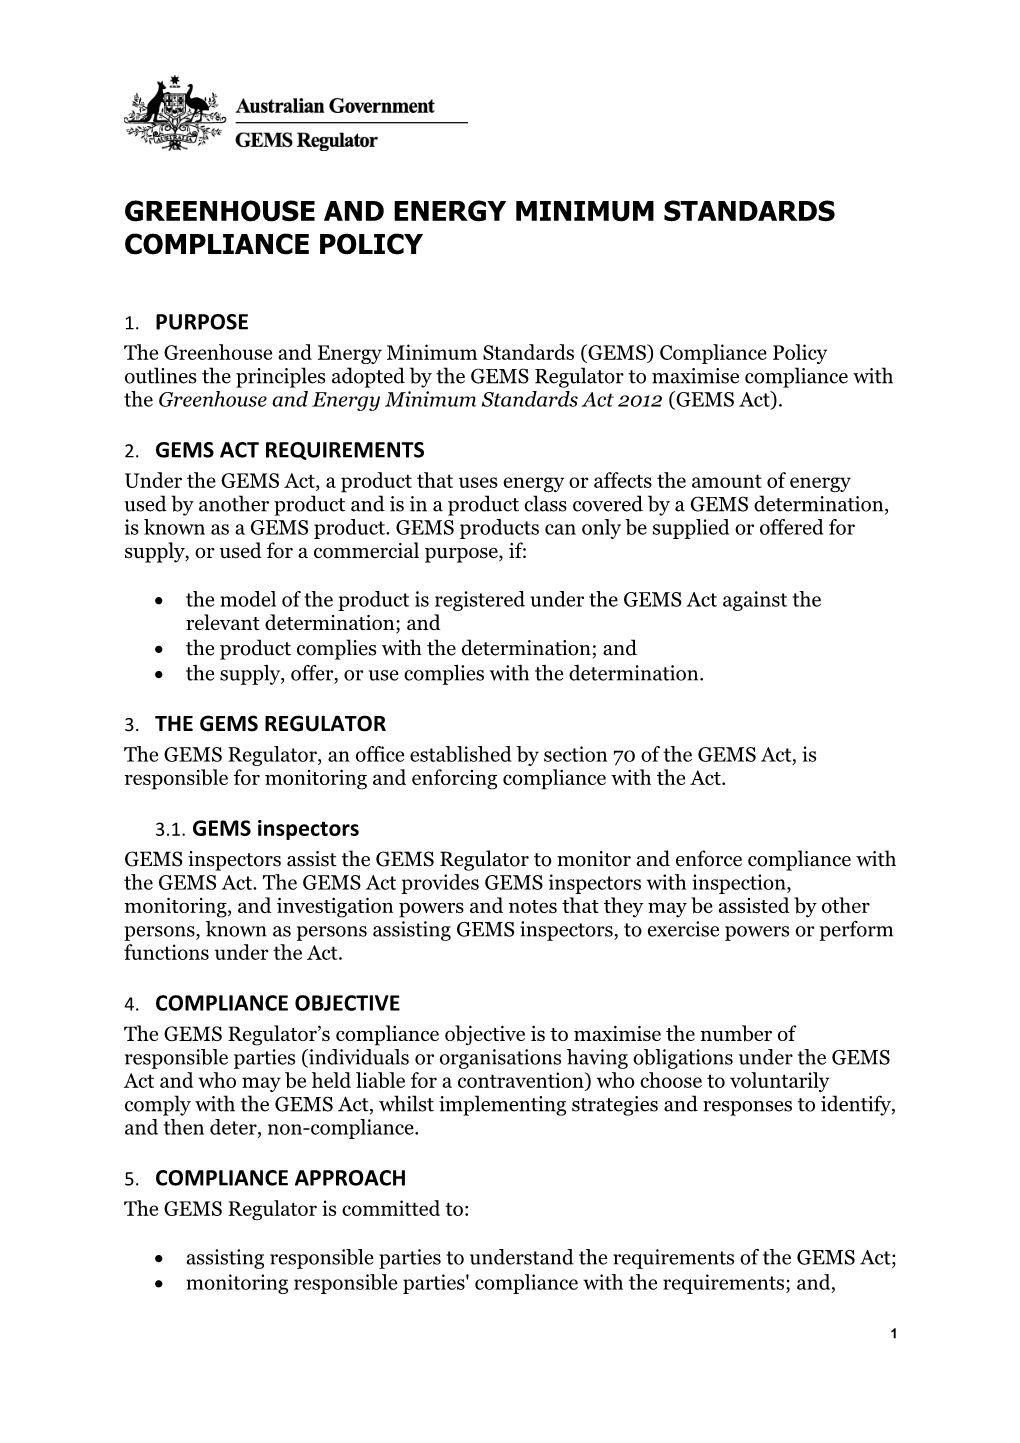 GEMS Compliance Policy 201505